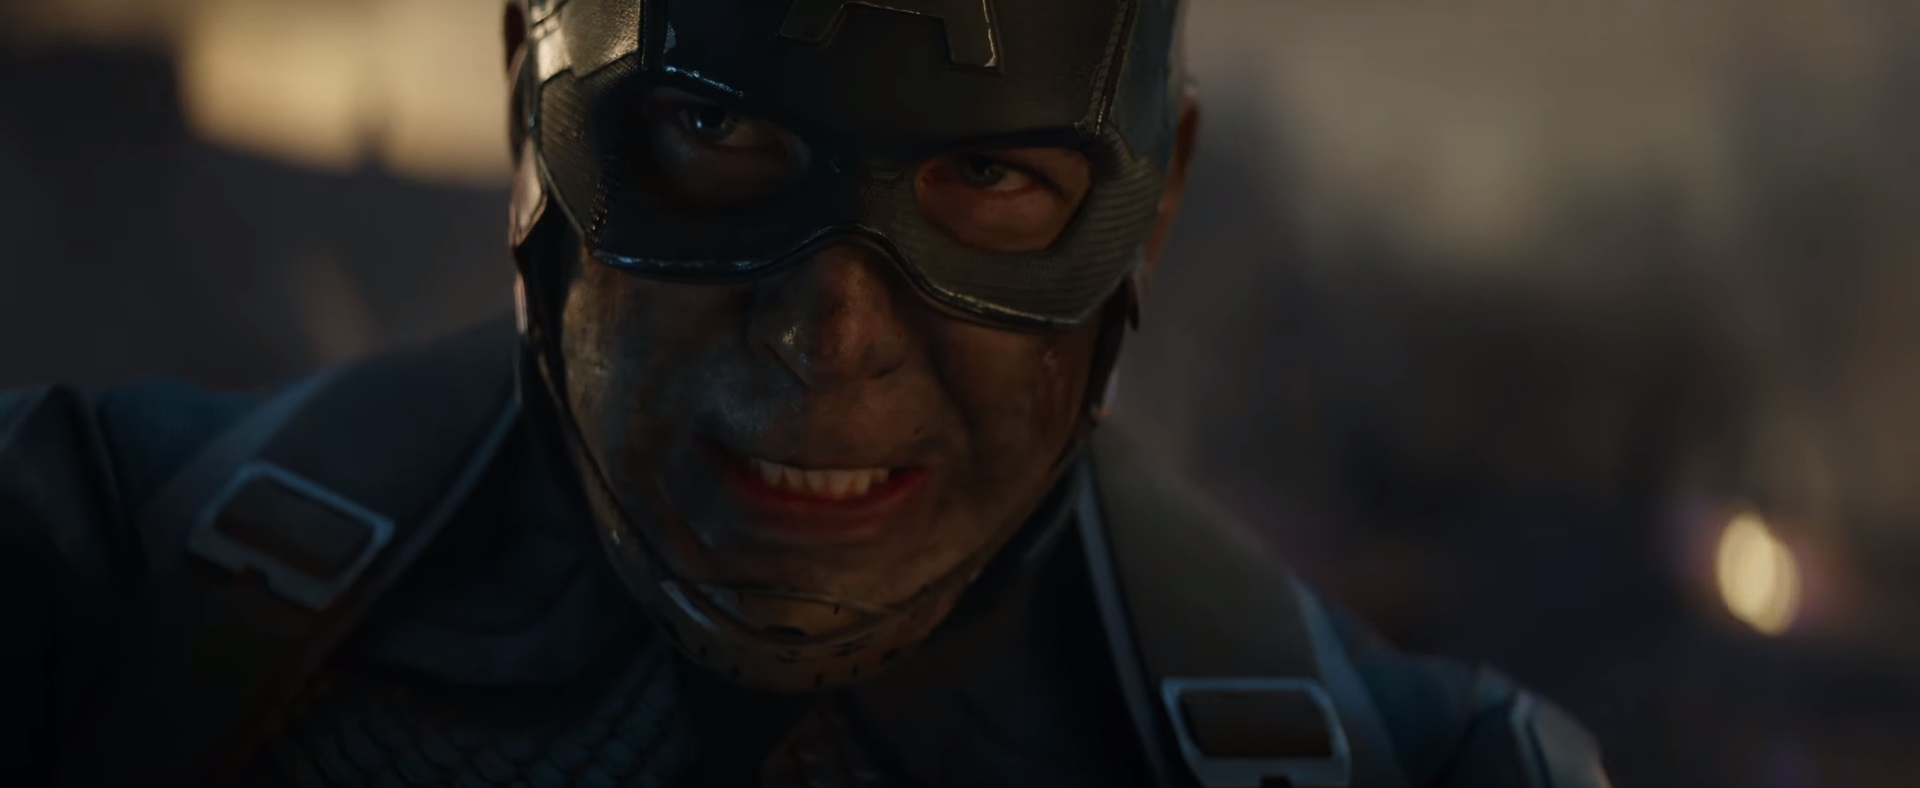 Avengers: Endgame Writers On Whether They Thought The Bleak Tone Was Risky [SPOILERS]